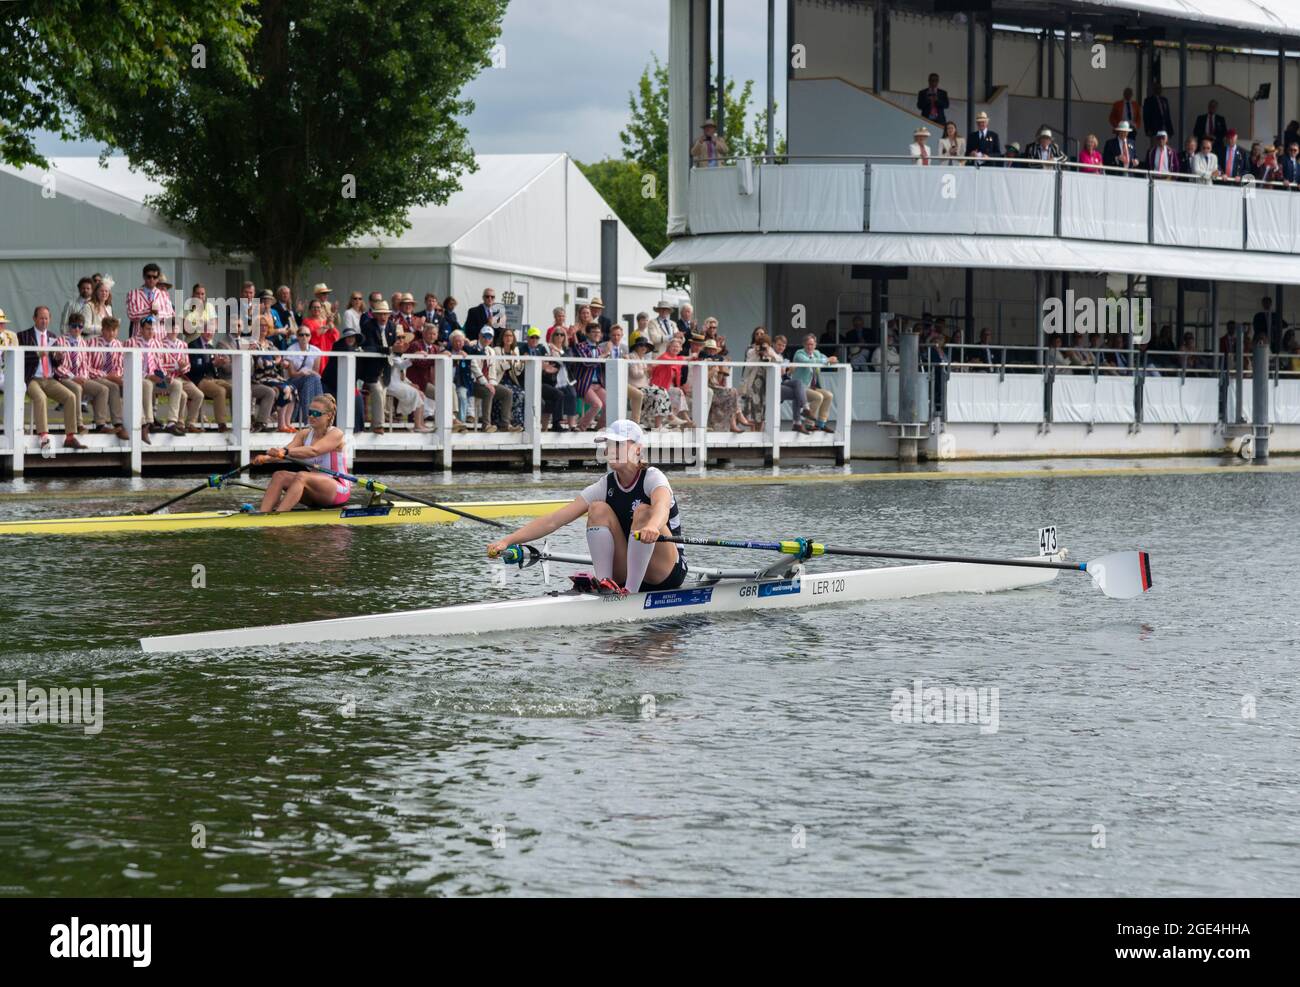 Final of the Princess Royal Challenge Cup at Henley Royal Regatta(2021) when L.E.B.Anderson (Leander) beat L.R.Henry (Leicester Rowing Club) by 3 feet Stock Photo